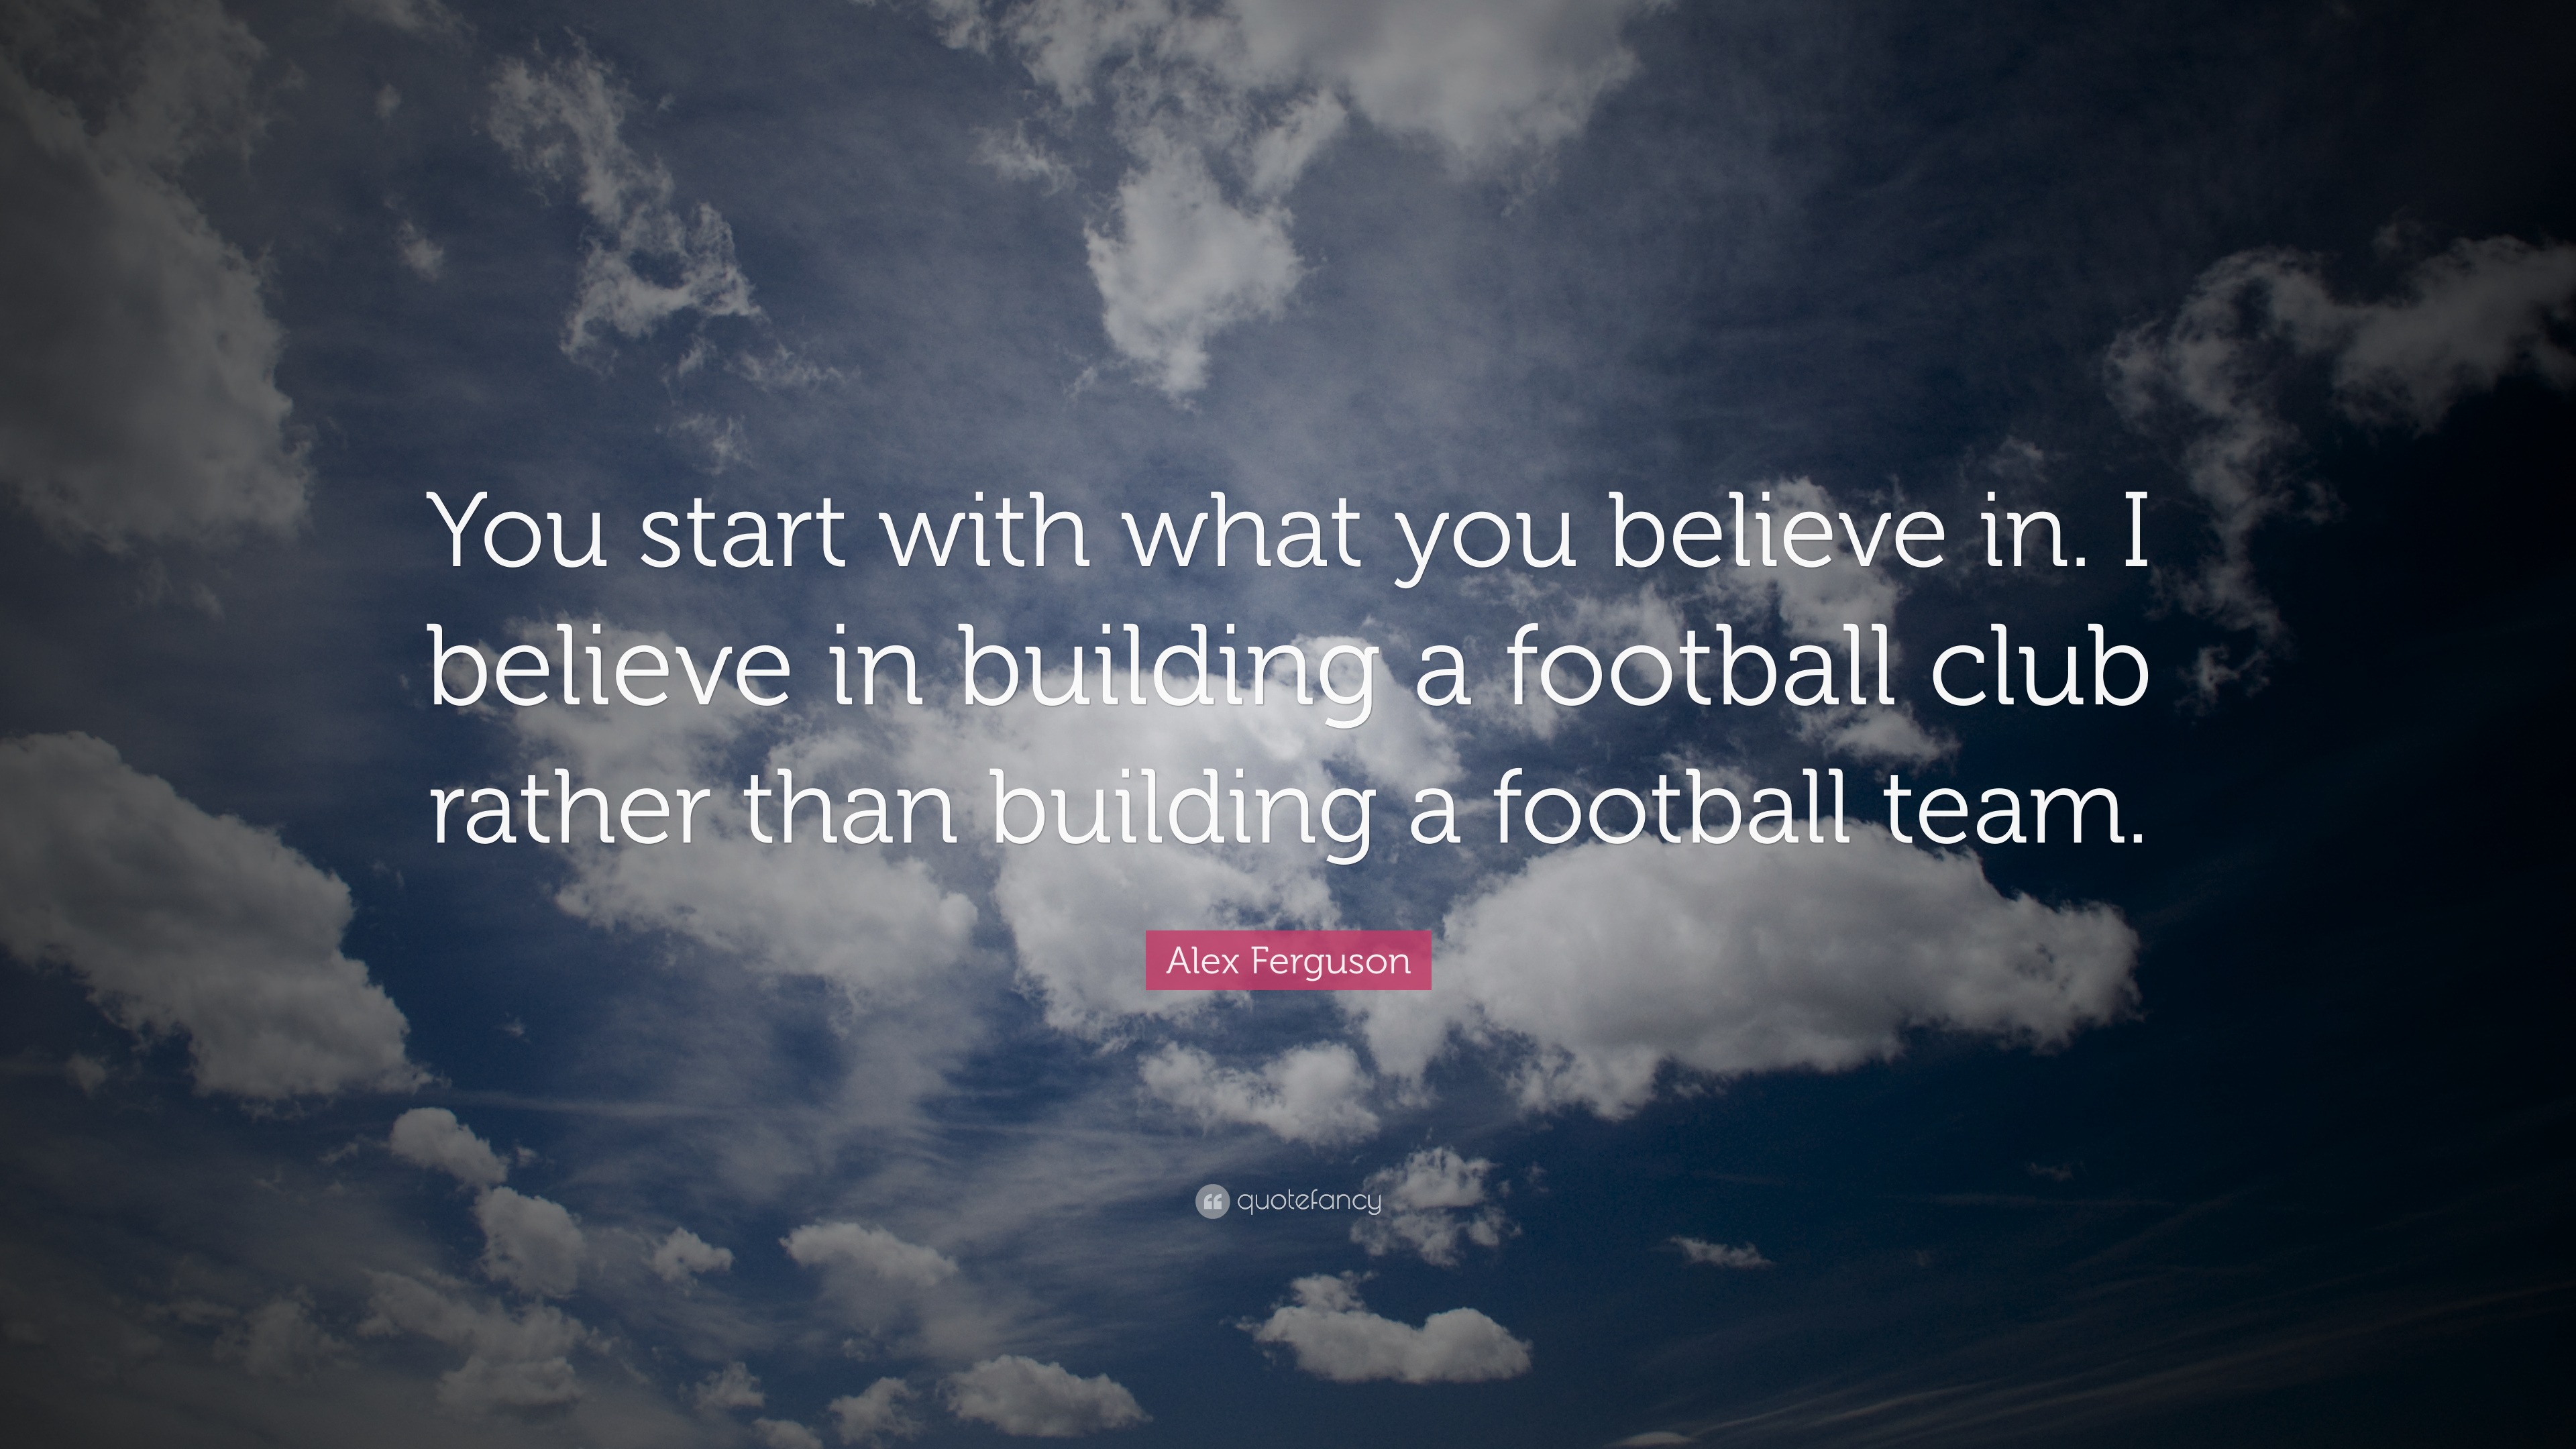 Alex Ferguson Quote You Start With What You Believe In I Images, Photos, Reviews